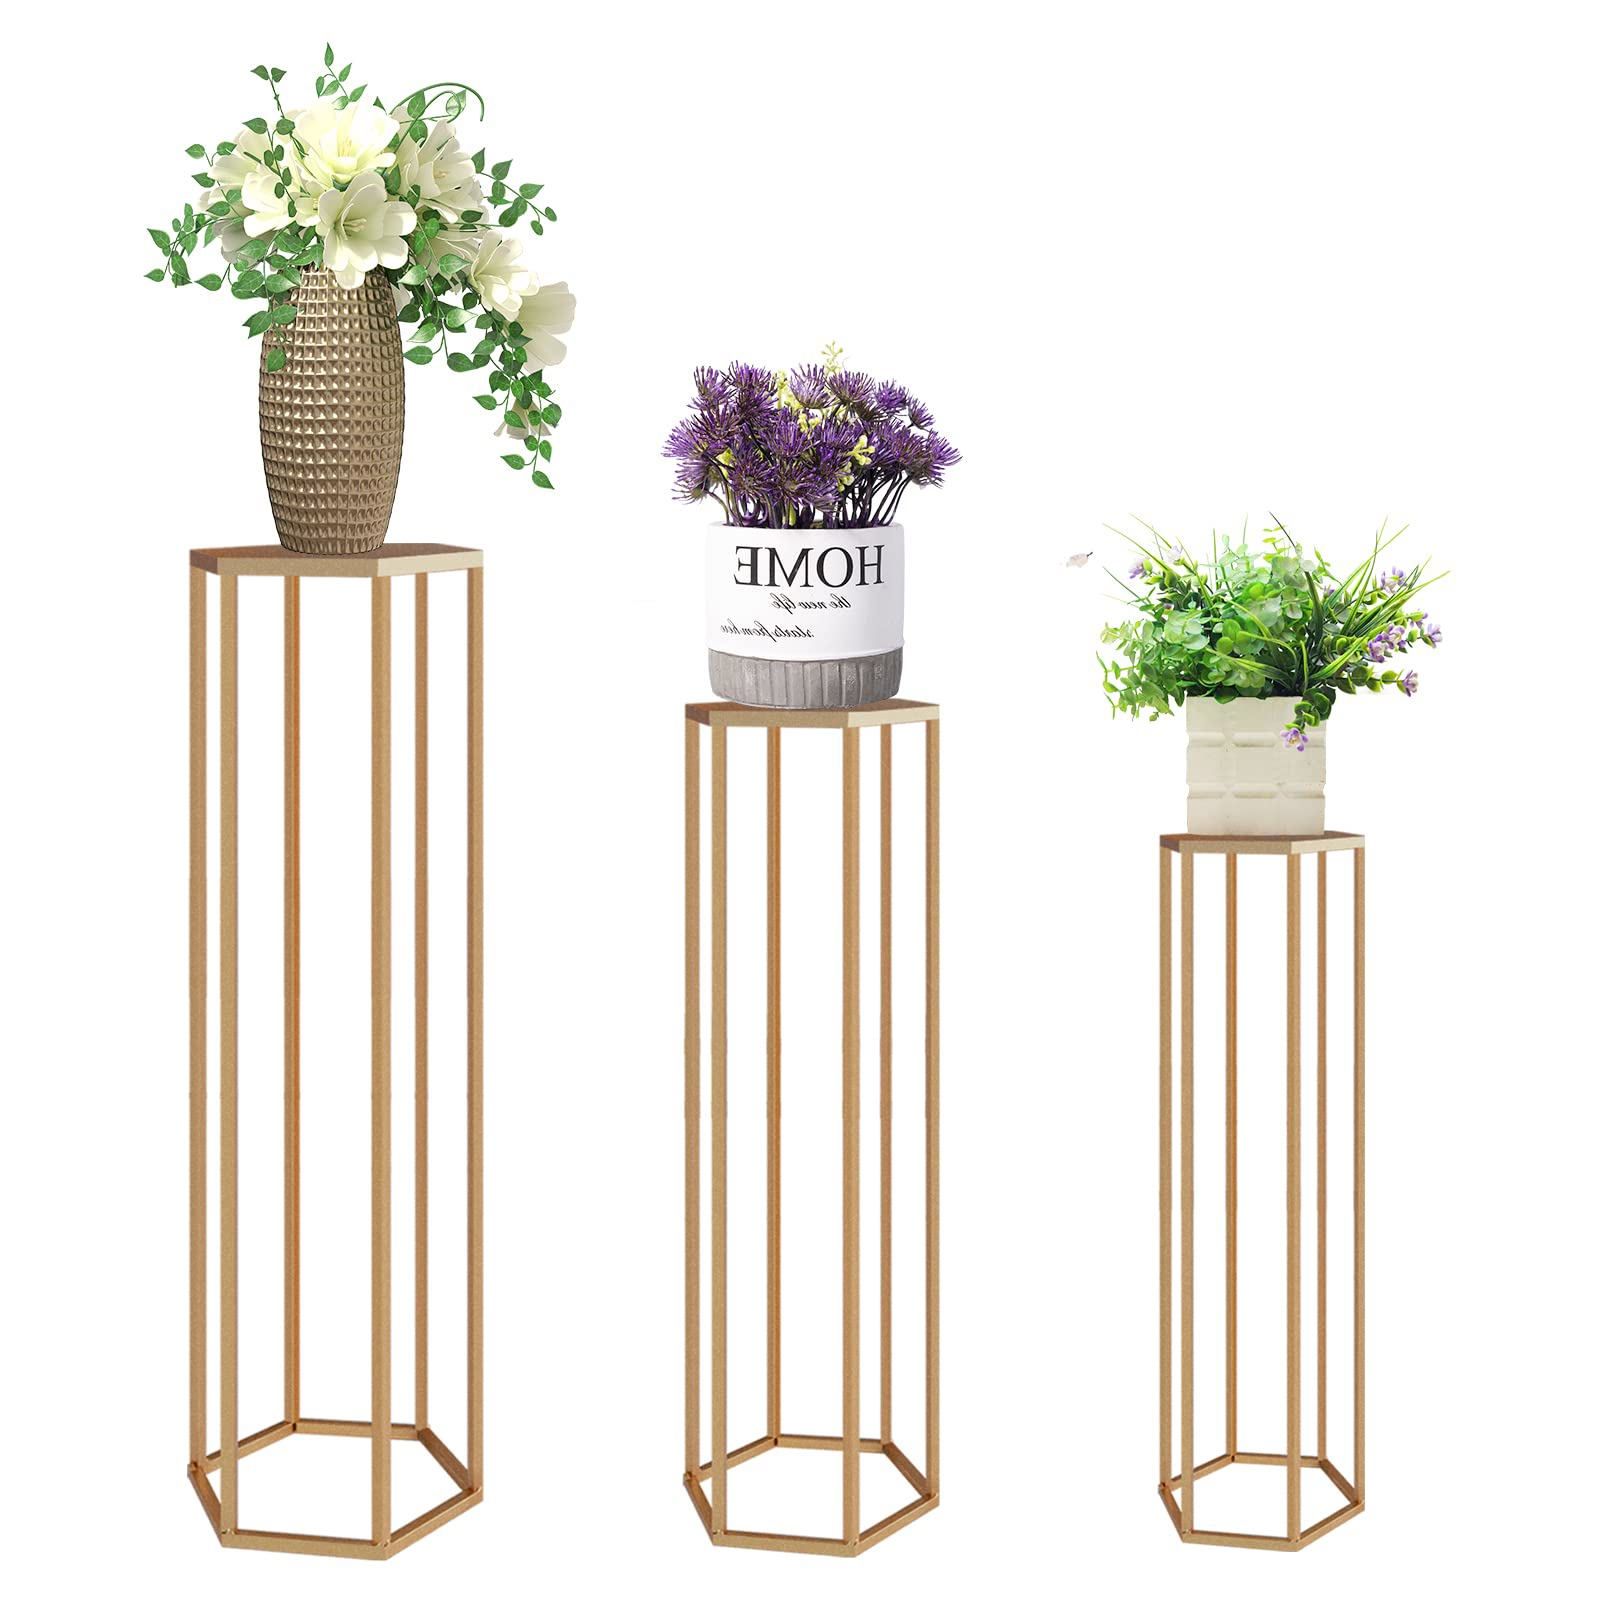 Hexagon Plant Stands With Recent Mxfurhawa Plant Stand Set Of 3 Hexagon Metal Plant Shelf For Indoor And  Outdoor, Gold – Walmart (View 7 of 15)